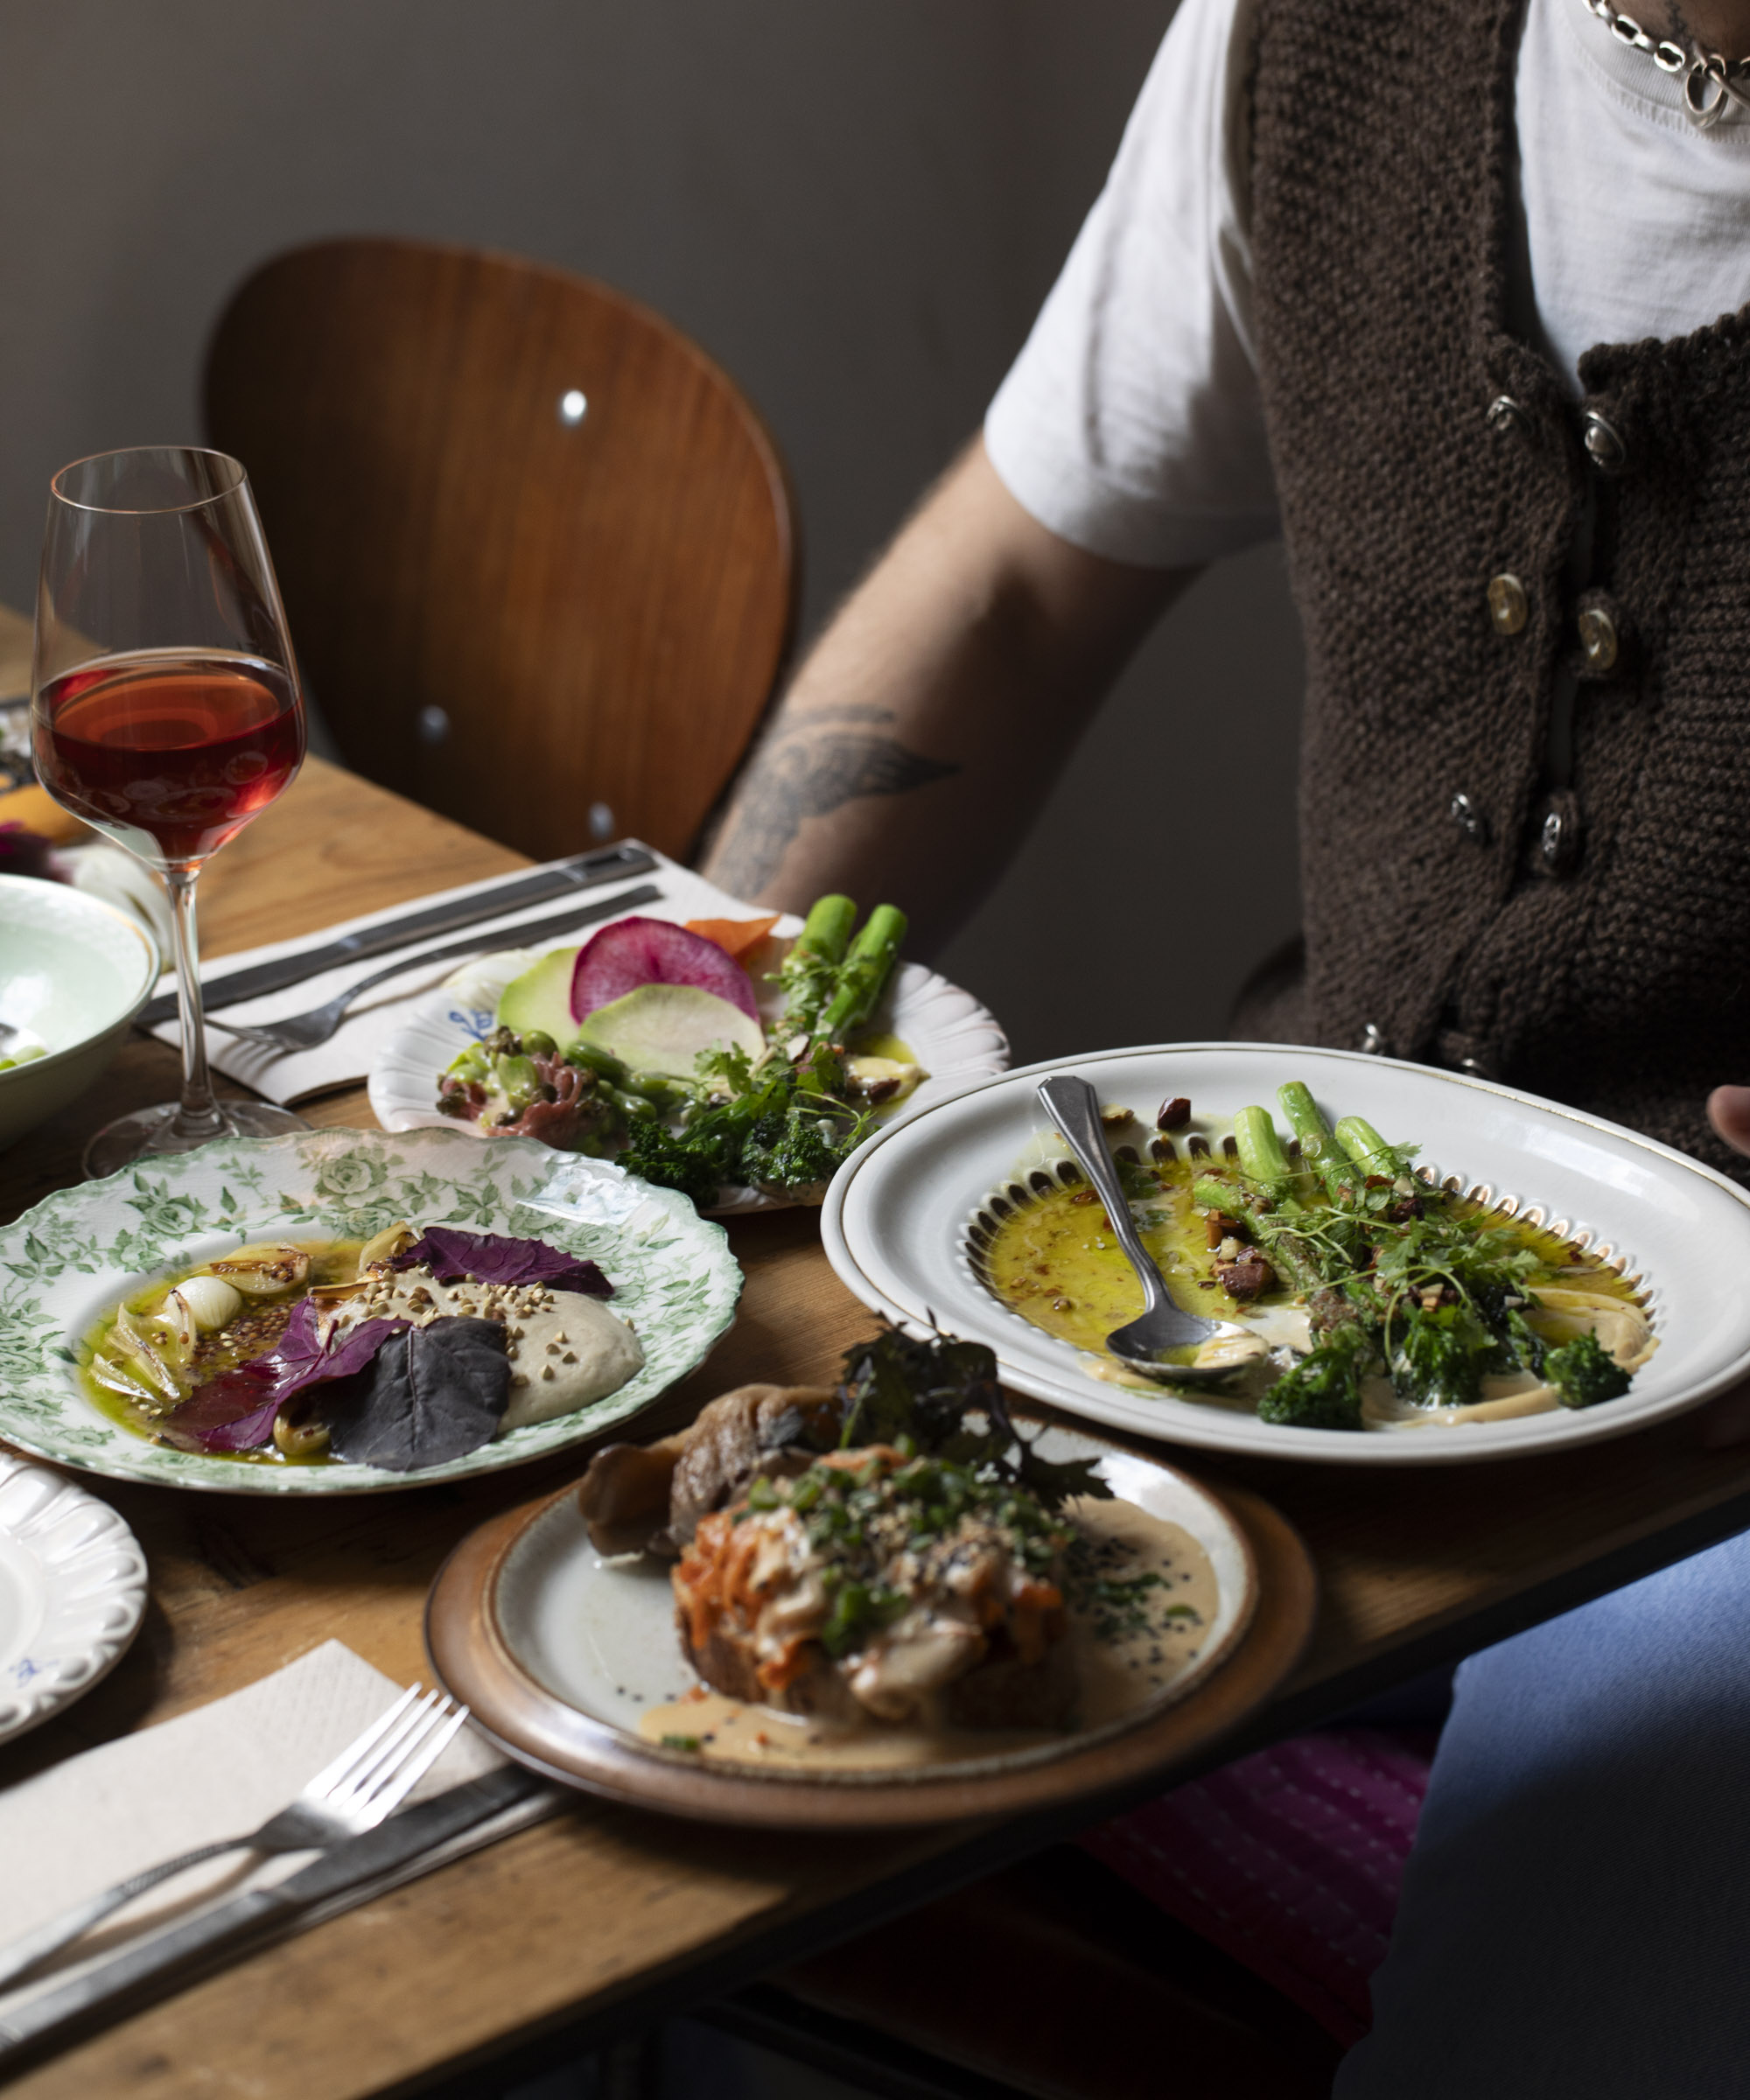 5-course menu at 3100 in Vesterbro – One of the city’s smallest, most personal restaurants is serving up vegetable-forward fare and redefining what a good meal is